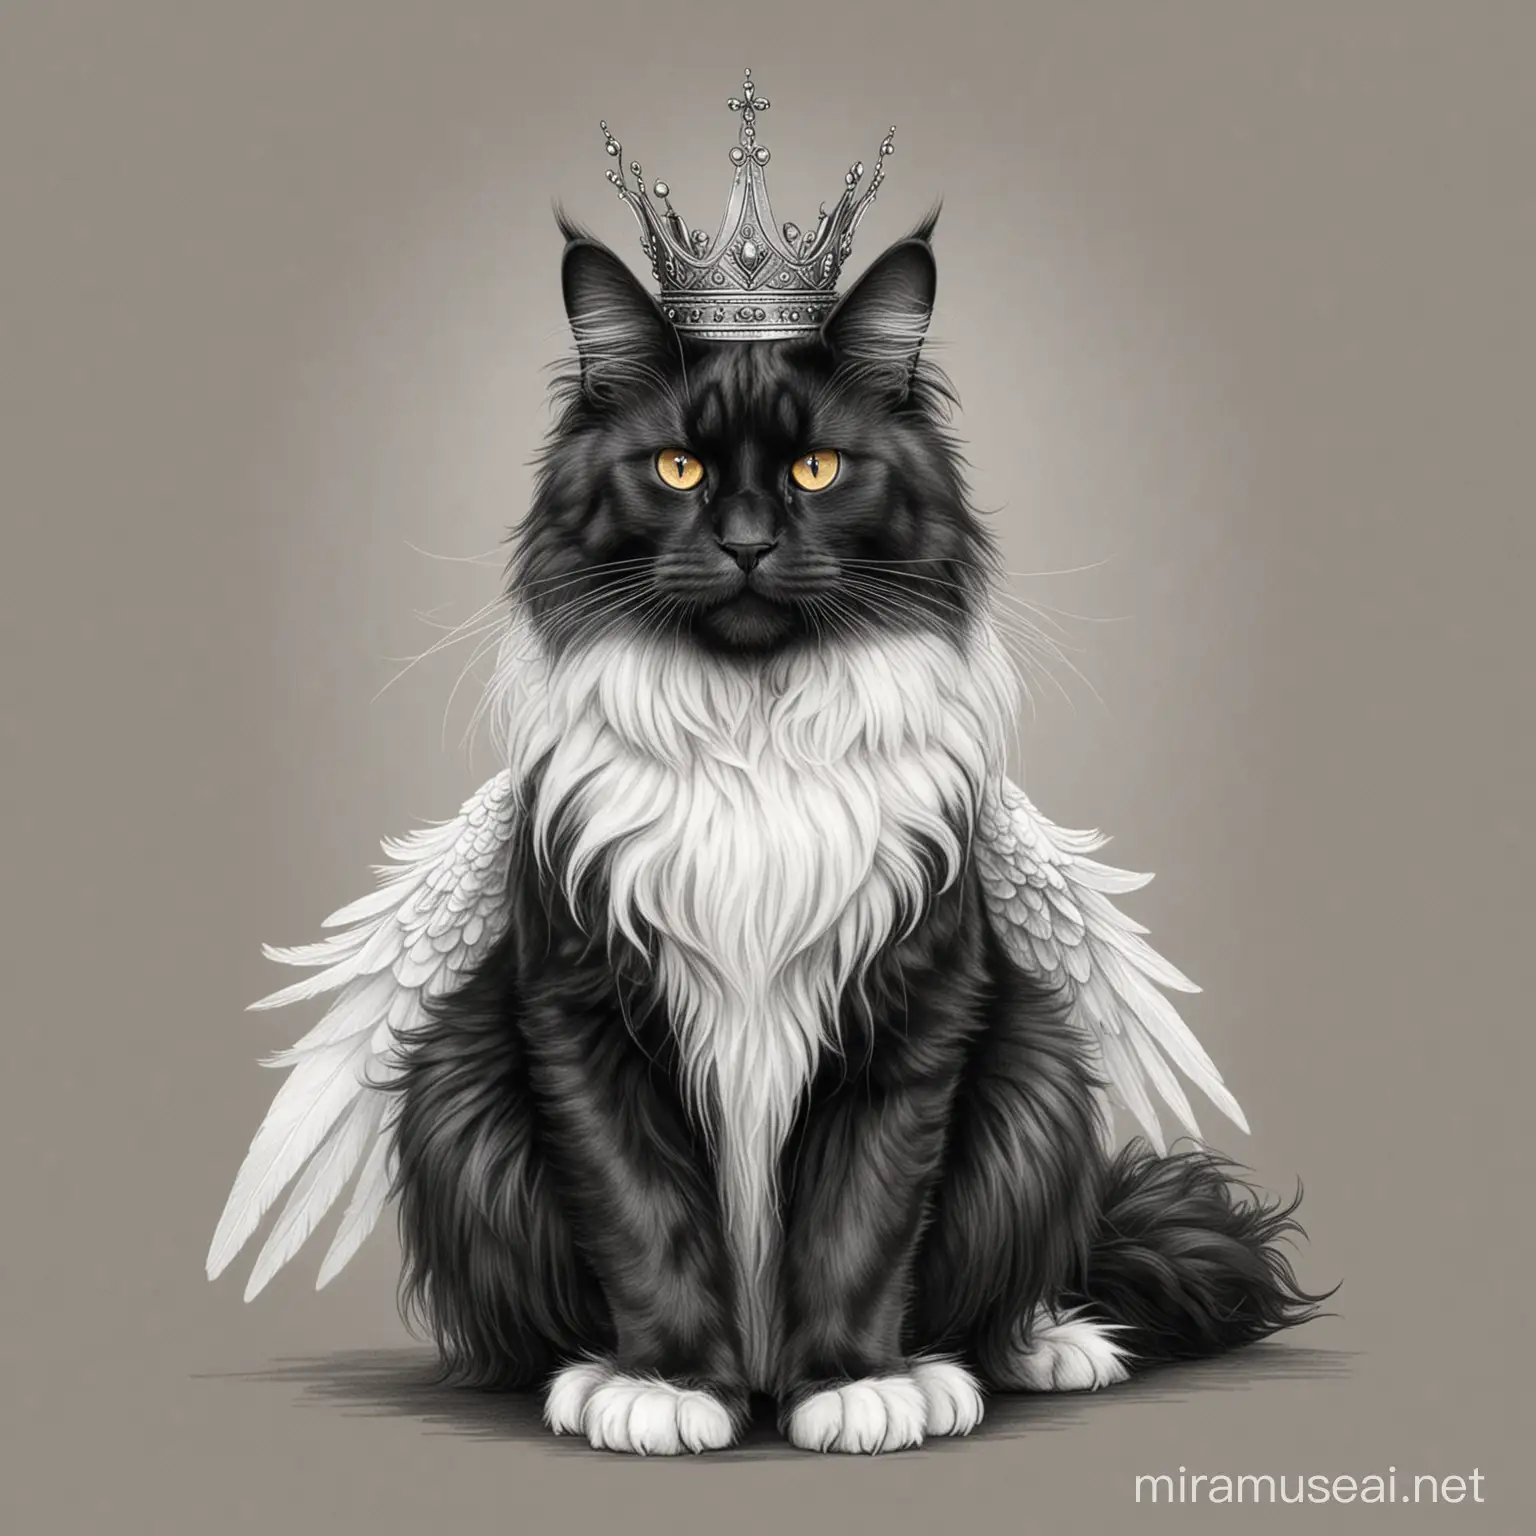 The Maine Coon cat breed is sitting , black color, white  wings on the back, with crown on his head, pencil drawing